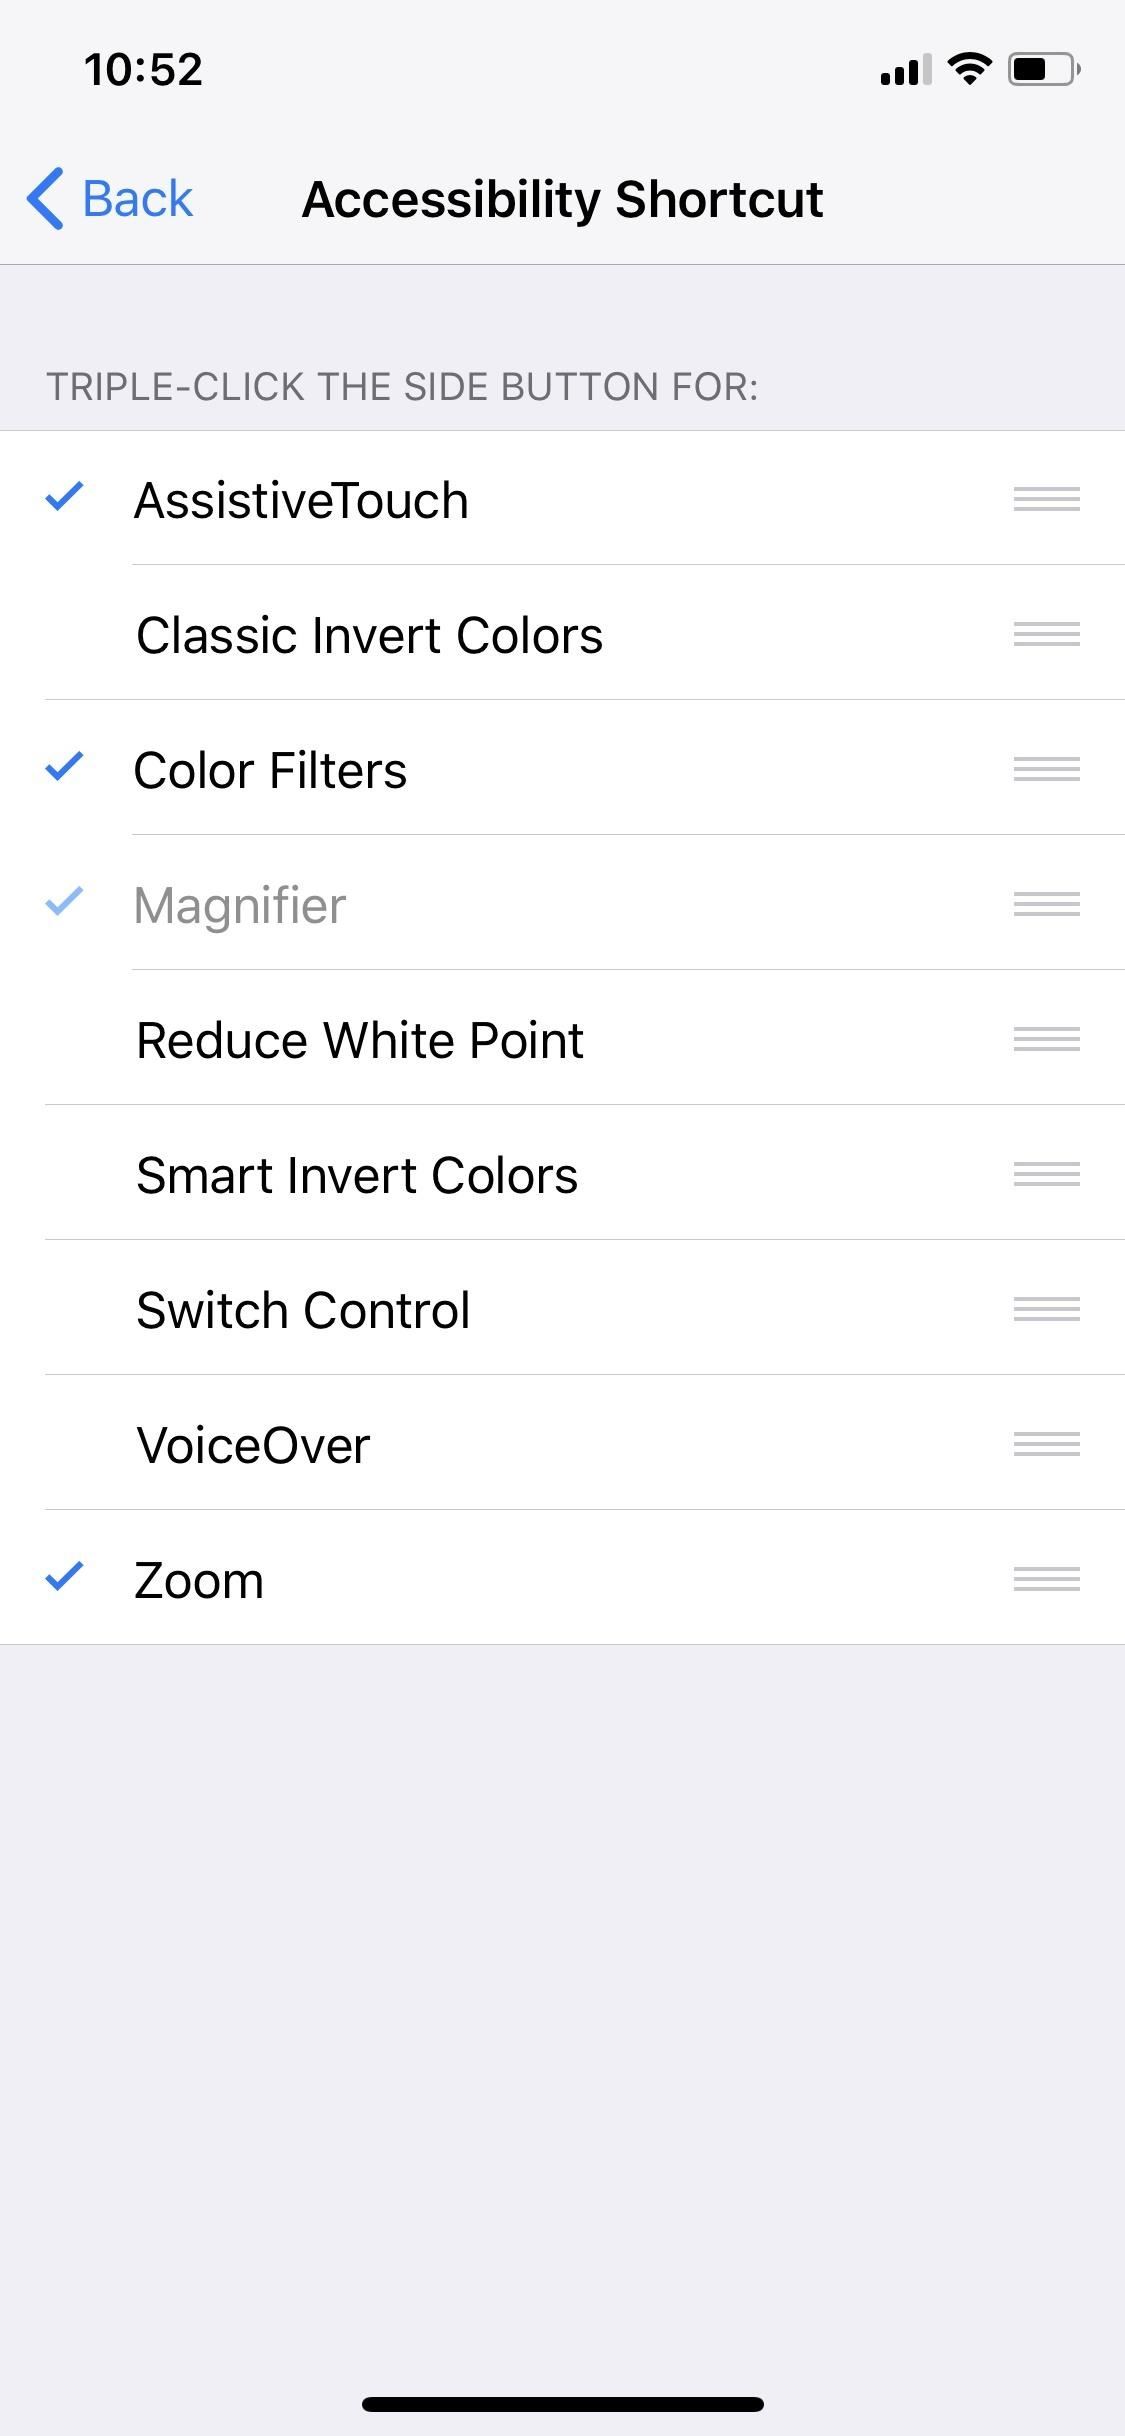 How to Open the Accessibility Shortcuts on iPhones Without a Home Button